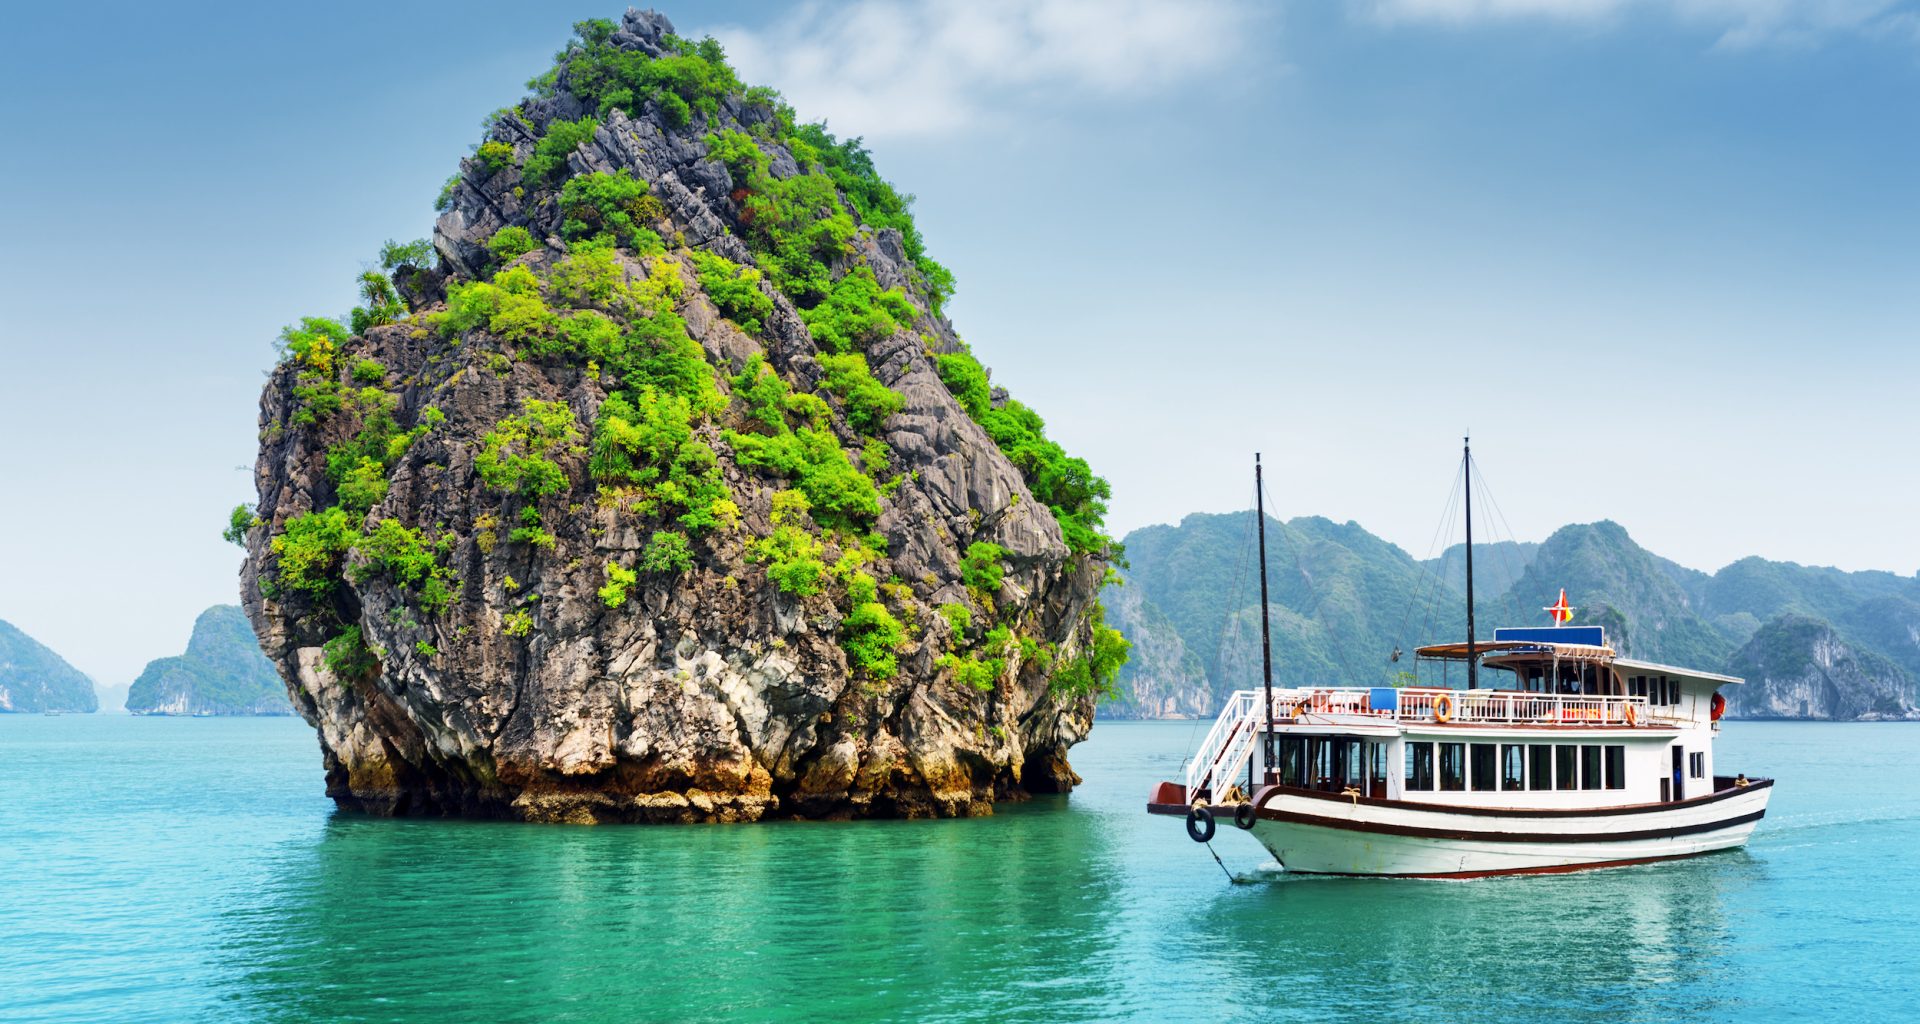 Beautiful view of karst isle and tourist boat in the Ha Long Bay